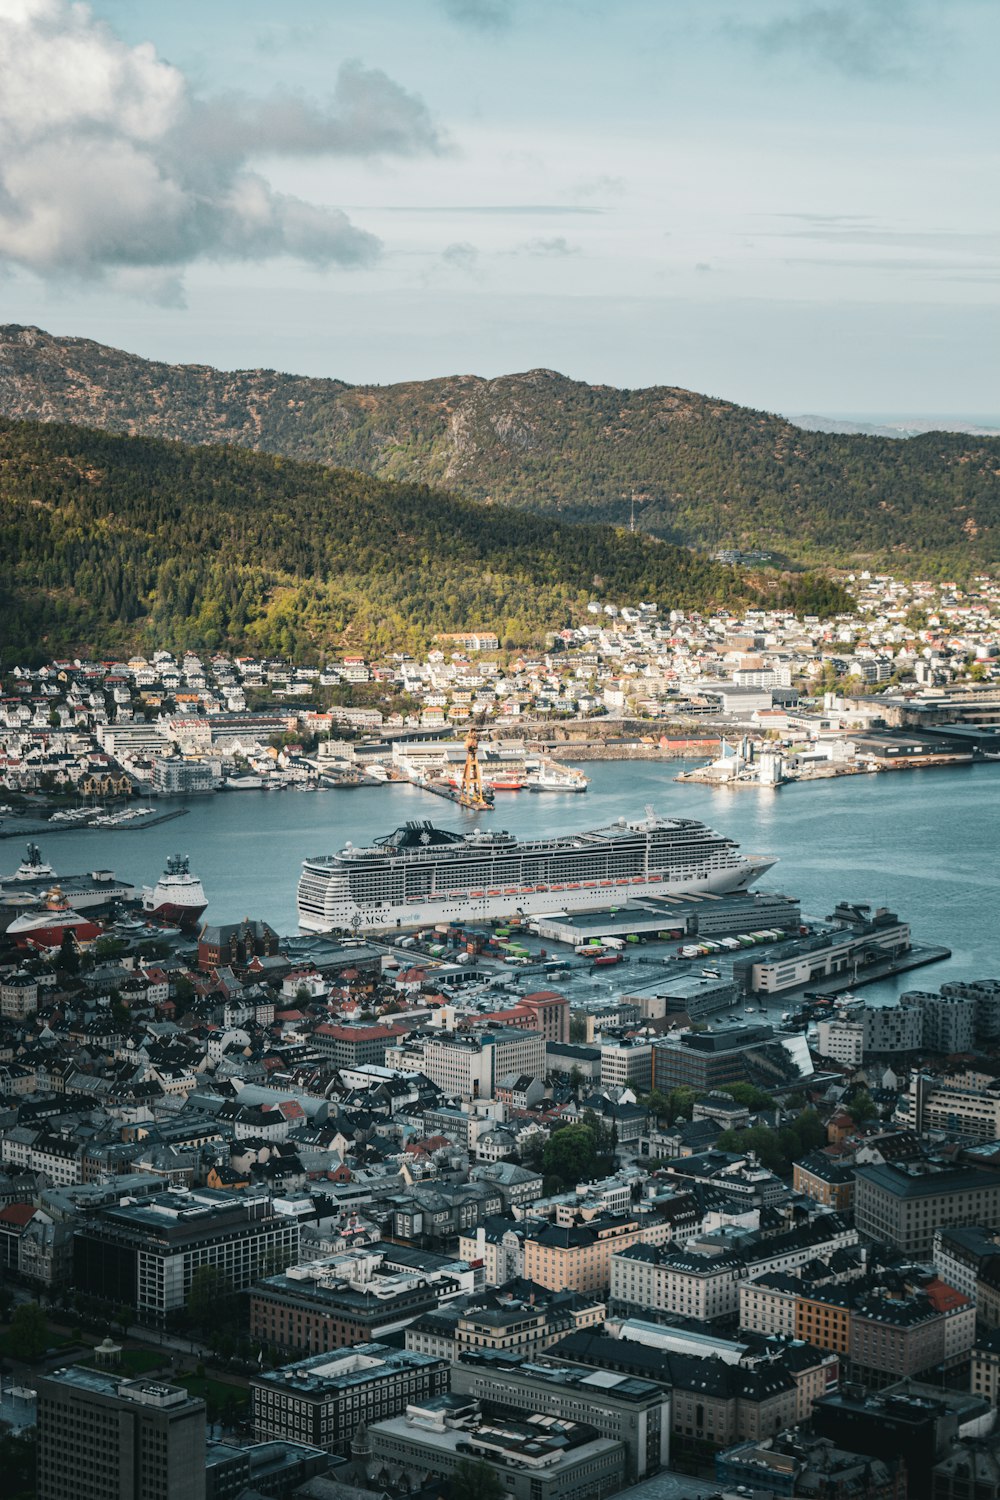 a cruise ship docked in a harbor next to a city